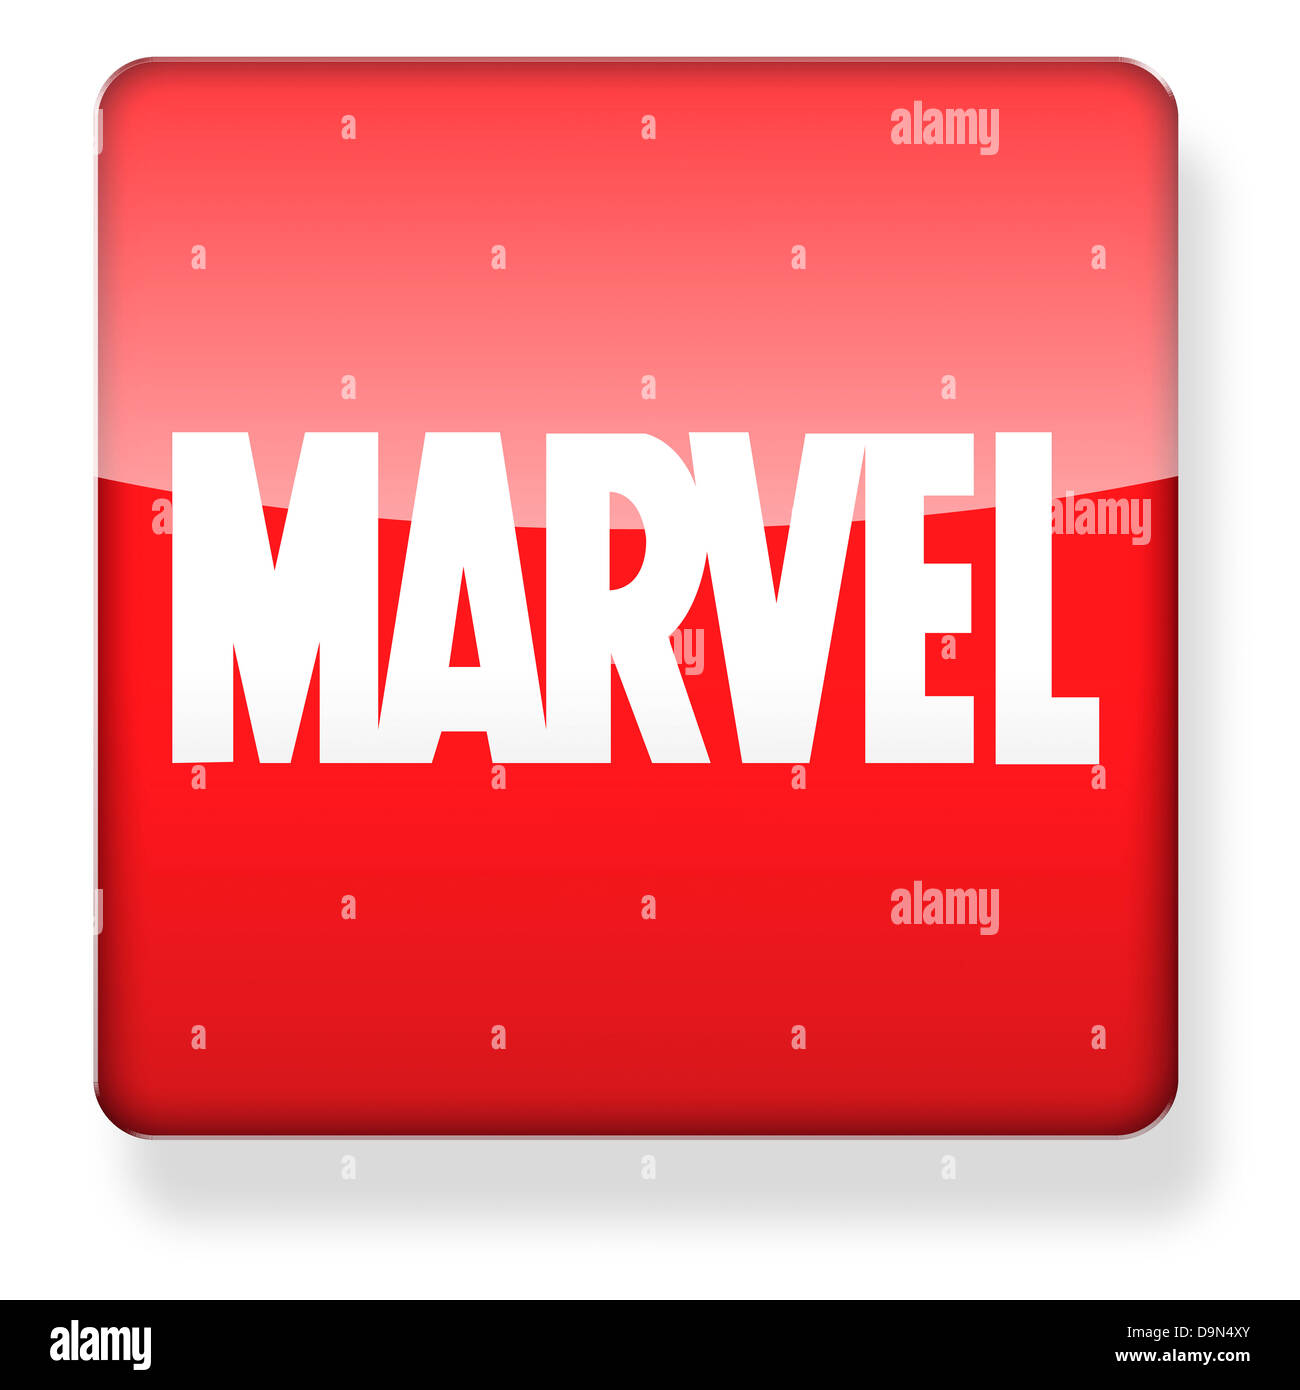 Marvel comics logo as an app icon. Clipping path included Stock Photo -  Alamy